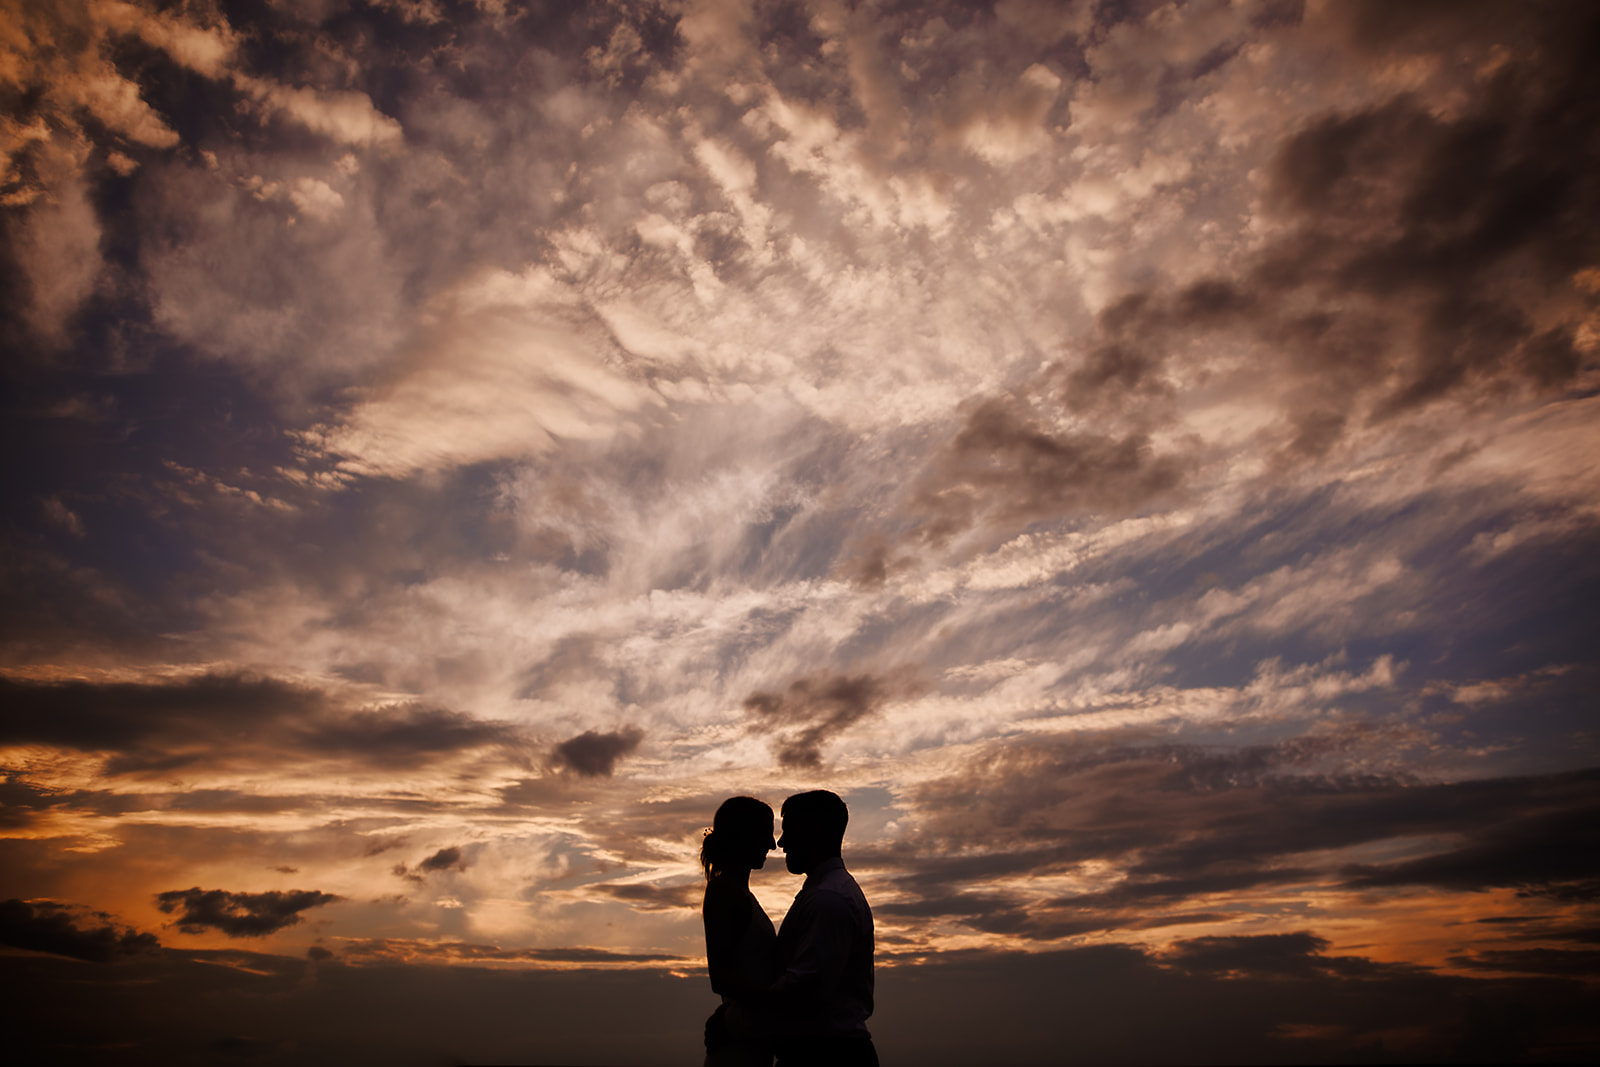 Silhouette of just married couple against an amazing sunset sky with detailed orange and pink clouds.